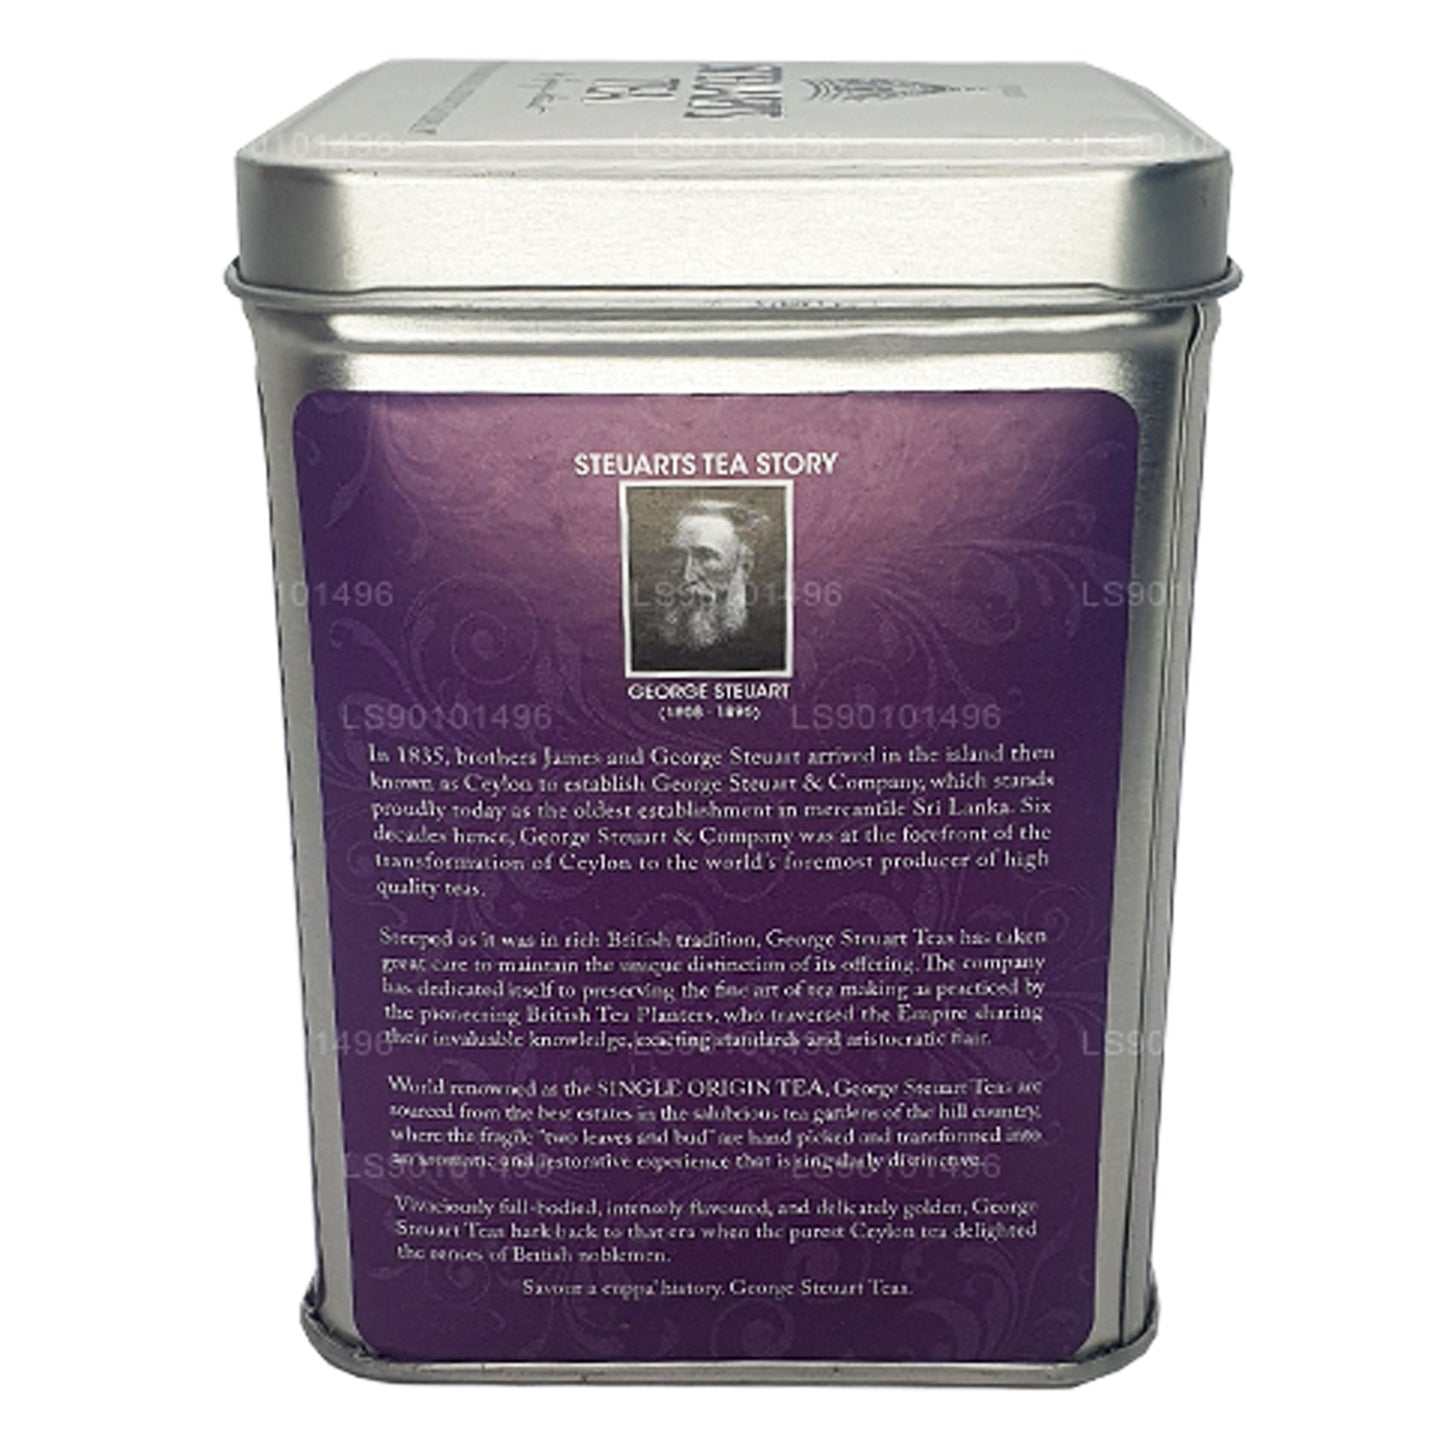 George Steuart Royal Delight thee (100 g) Bladthee